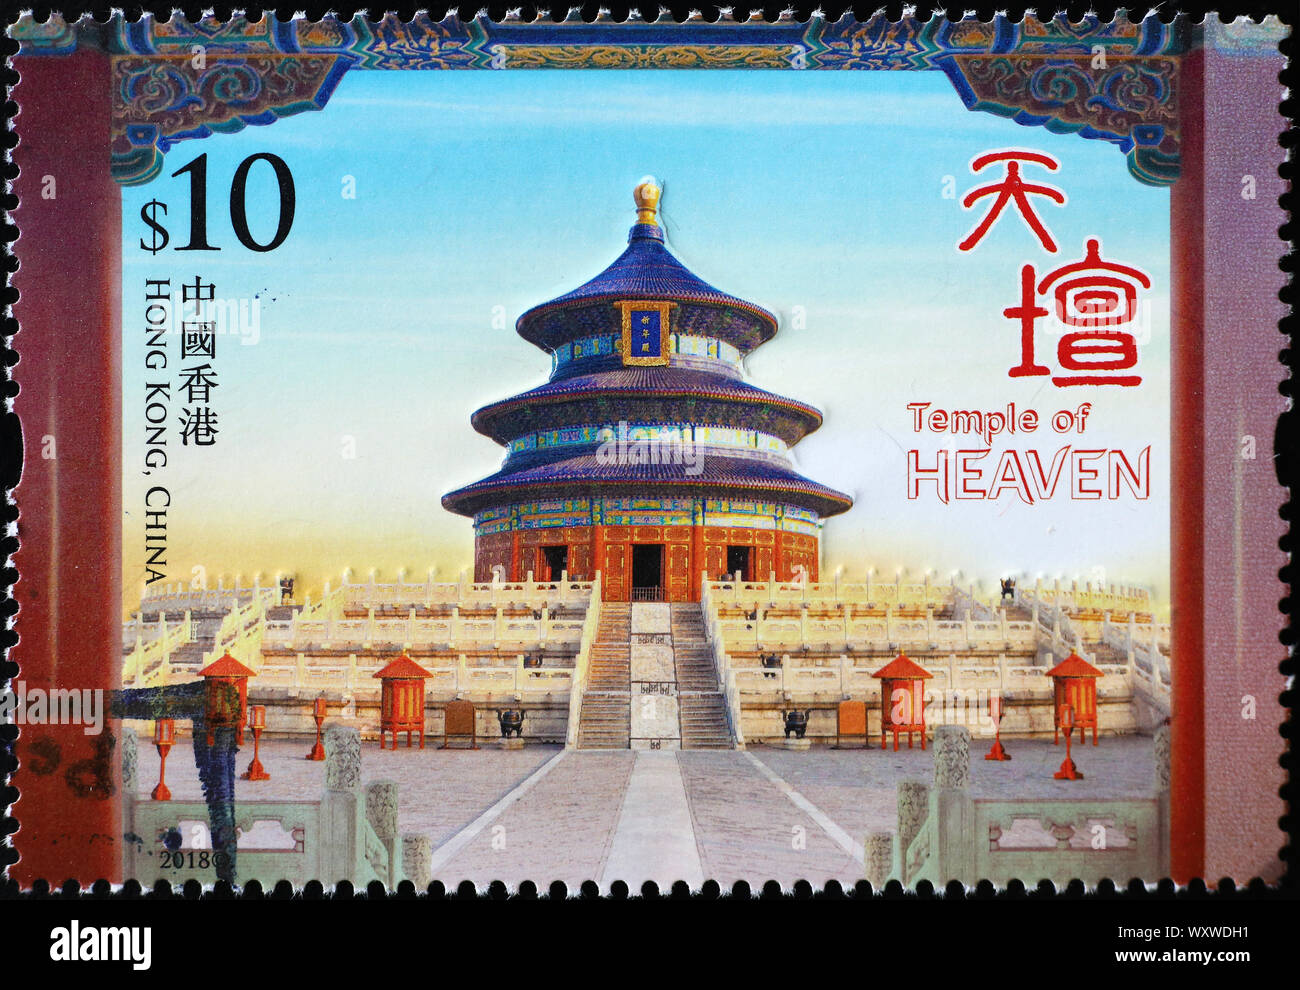 Temple of Heaven in Beijing on postage stamp Stock Photo